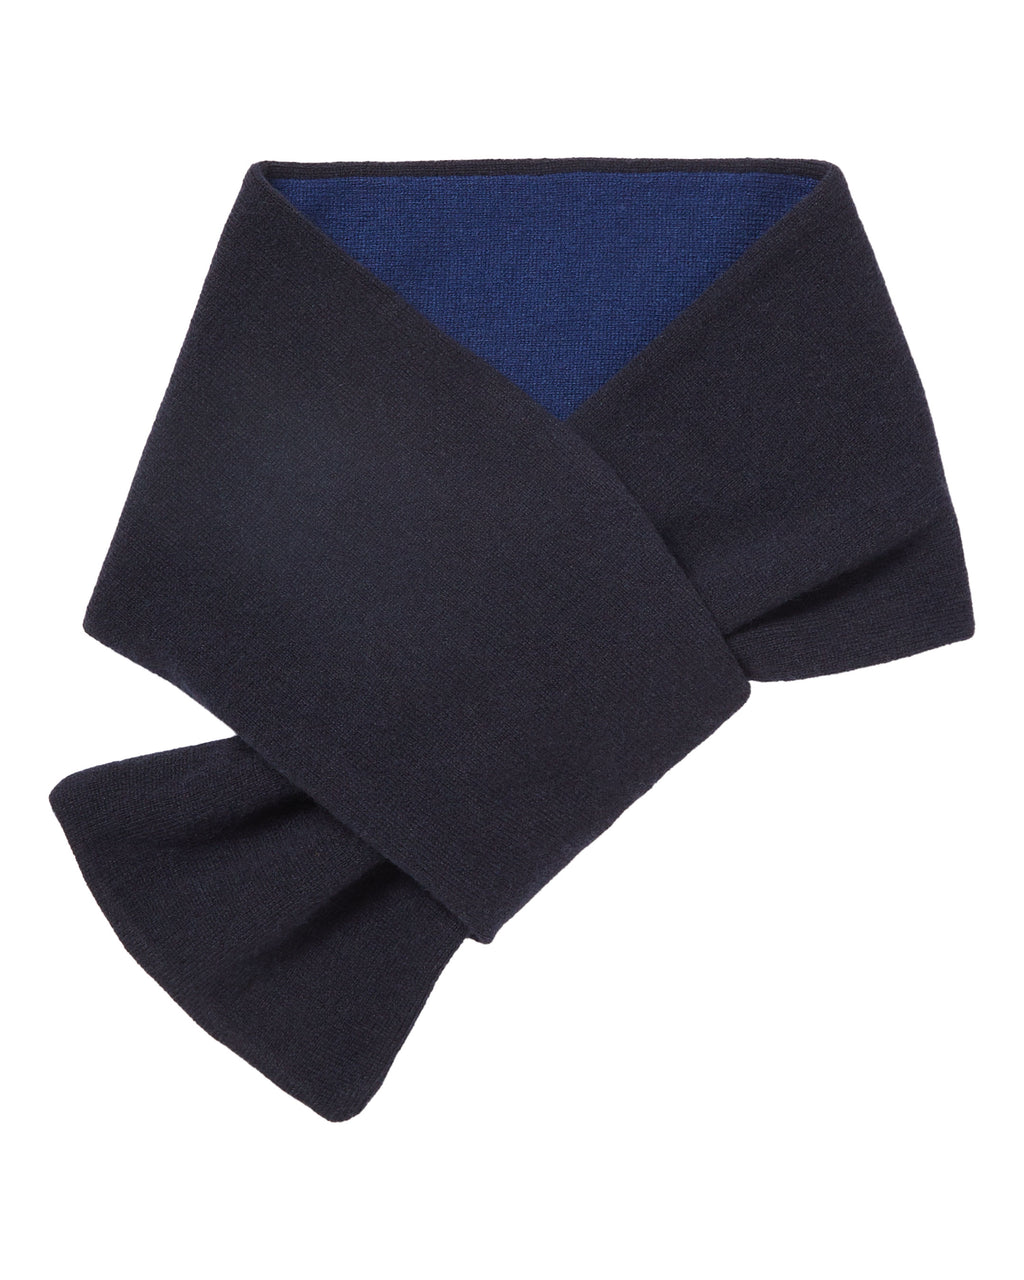 Mens 100% Cashmere Scarf 22×72 Inches Long Soft Non-Irritating